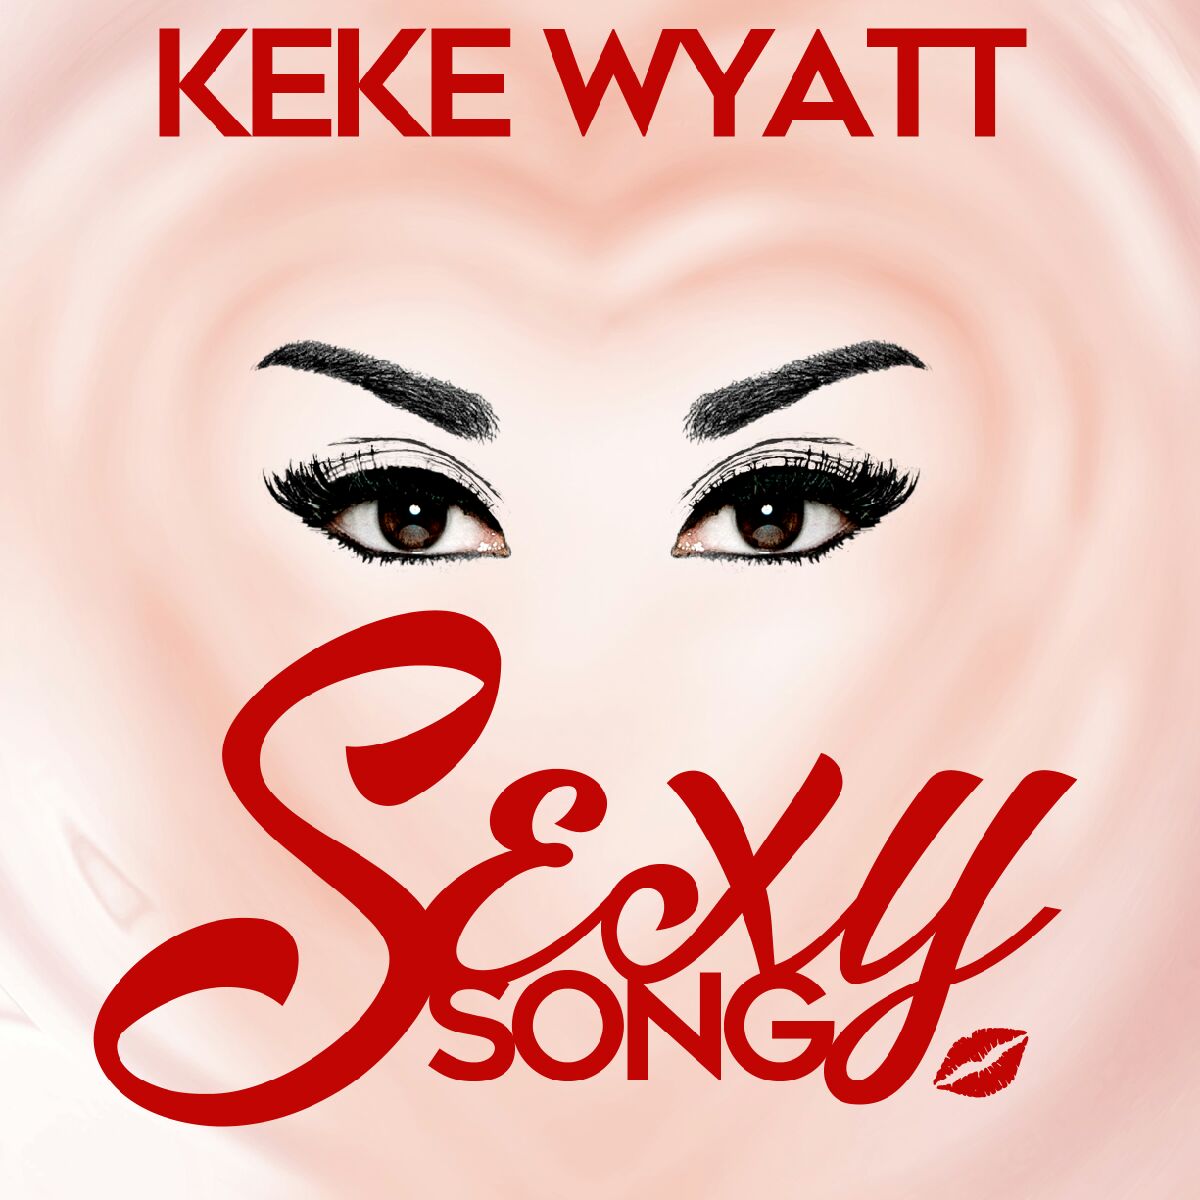 Watch Behind the Scenes Footage of Keke Wyatt's Upcoming Video for "Sexy Song"